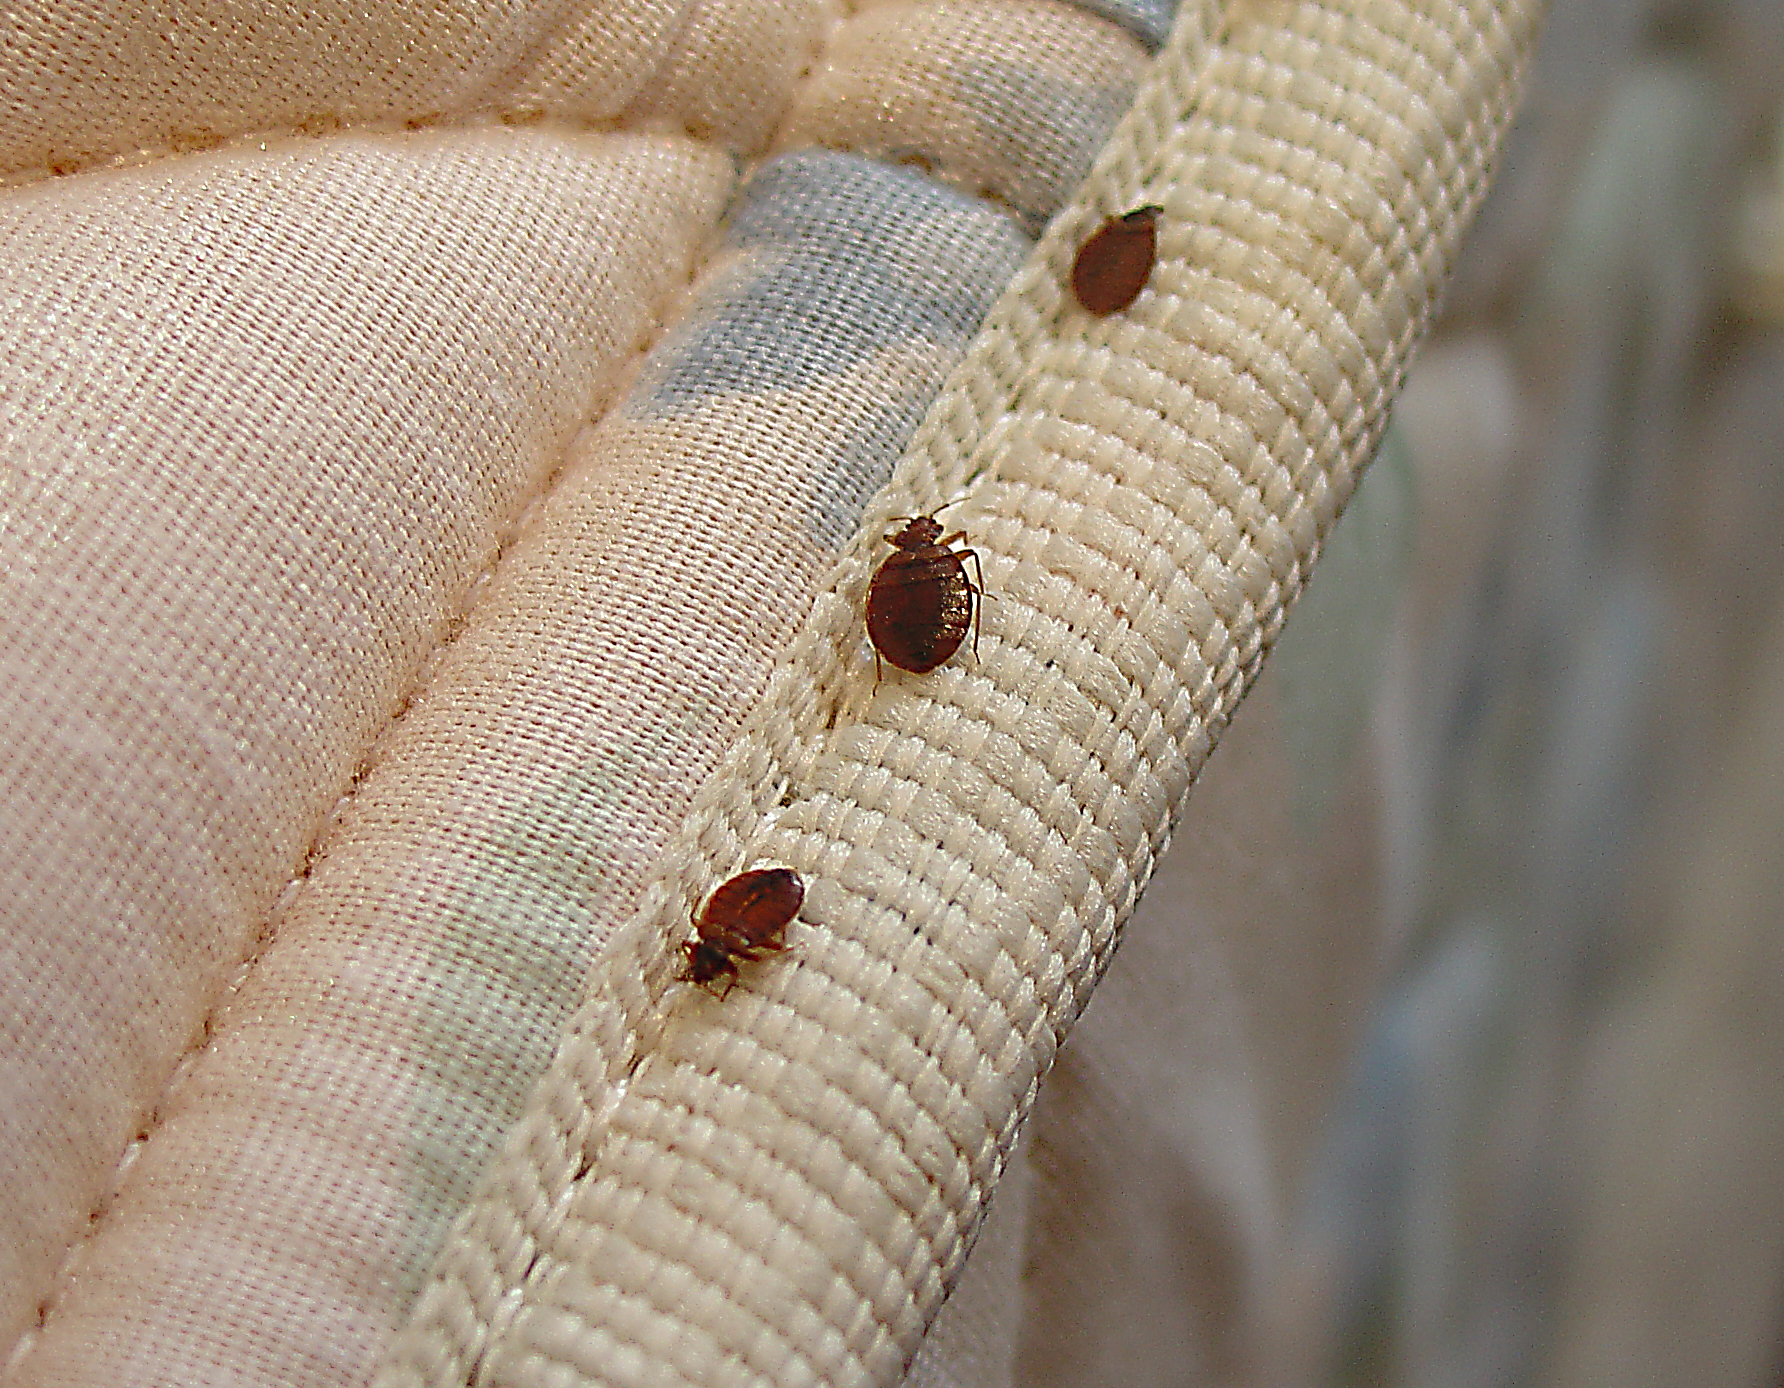 pictures of bed bugs in a mattress